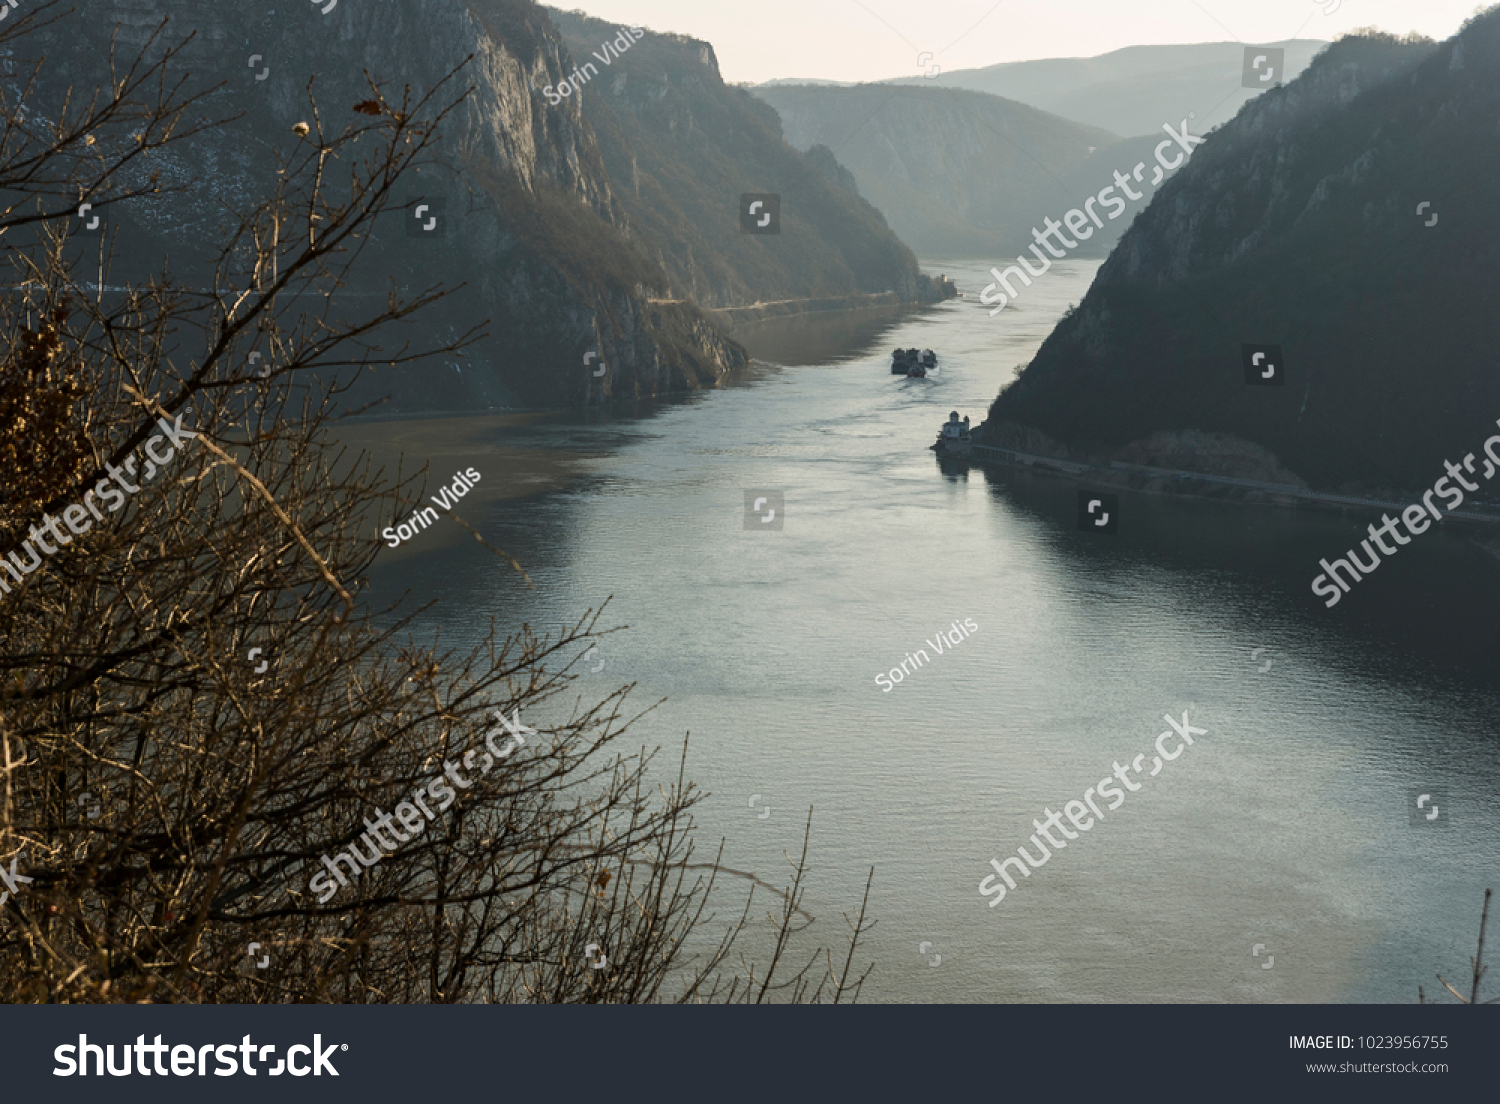 Danube between mountains/Narrow natural channel on the Danube river between the Carpathian mountains that constitutes the border between Romania and Serbia, where a barge is passing by a small church. #1023956755